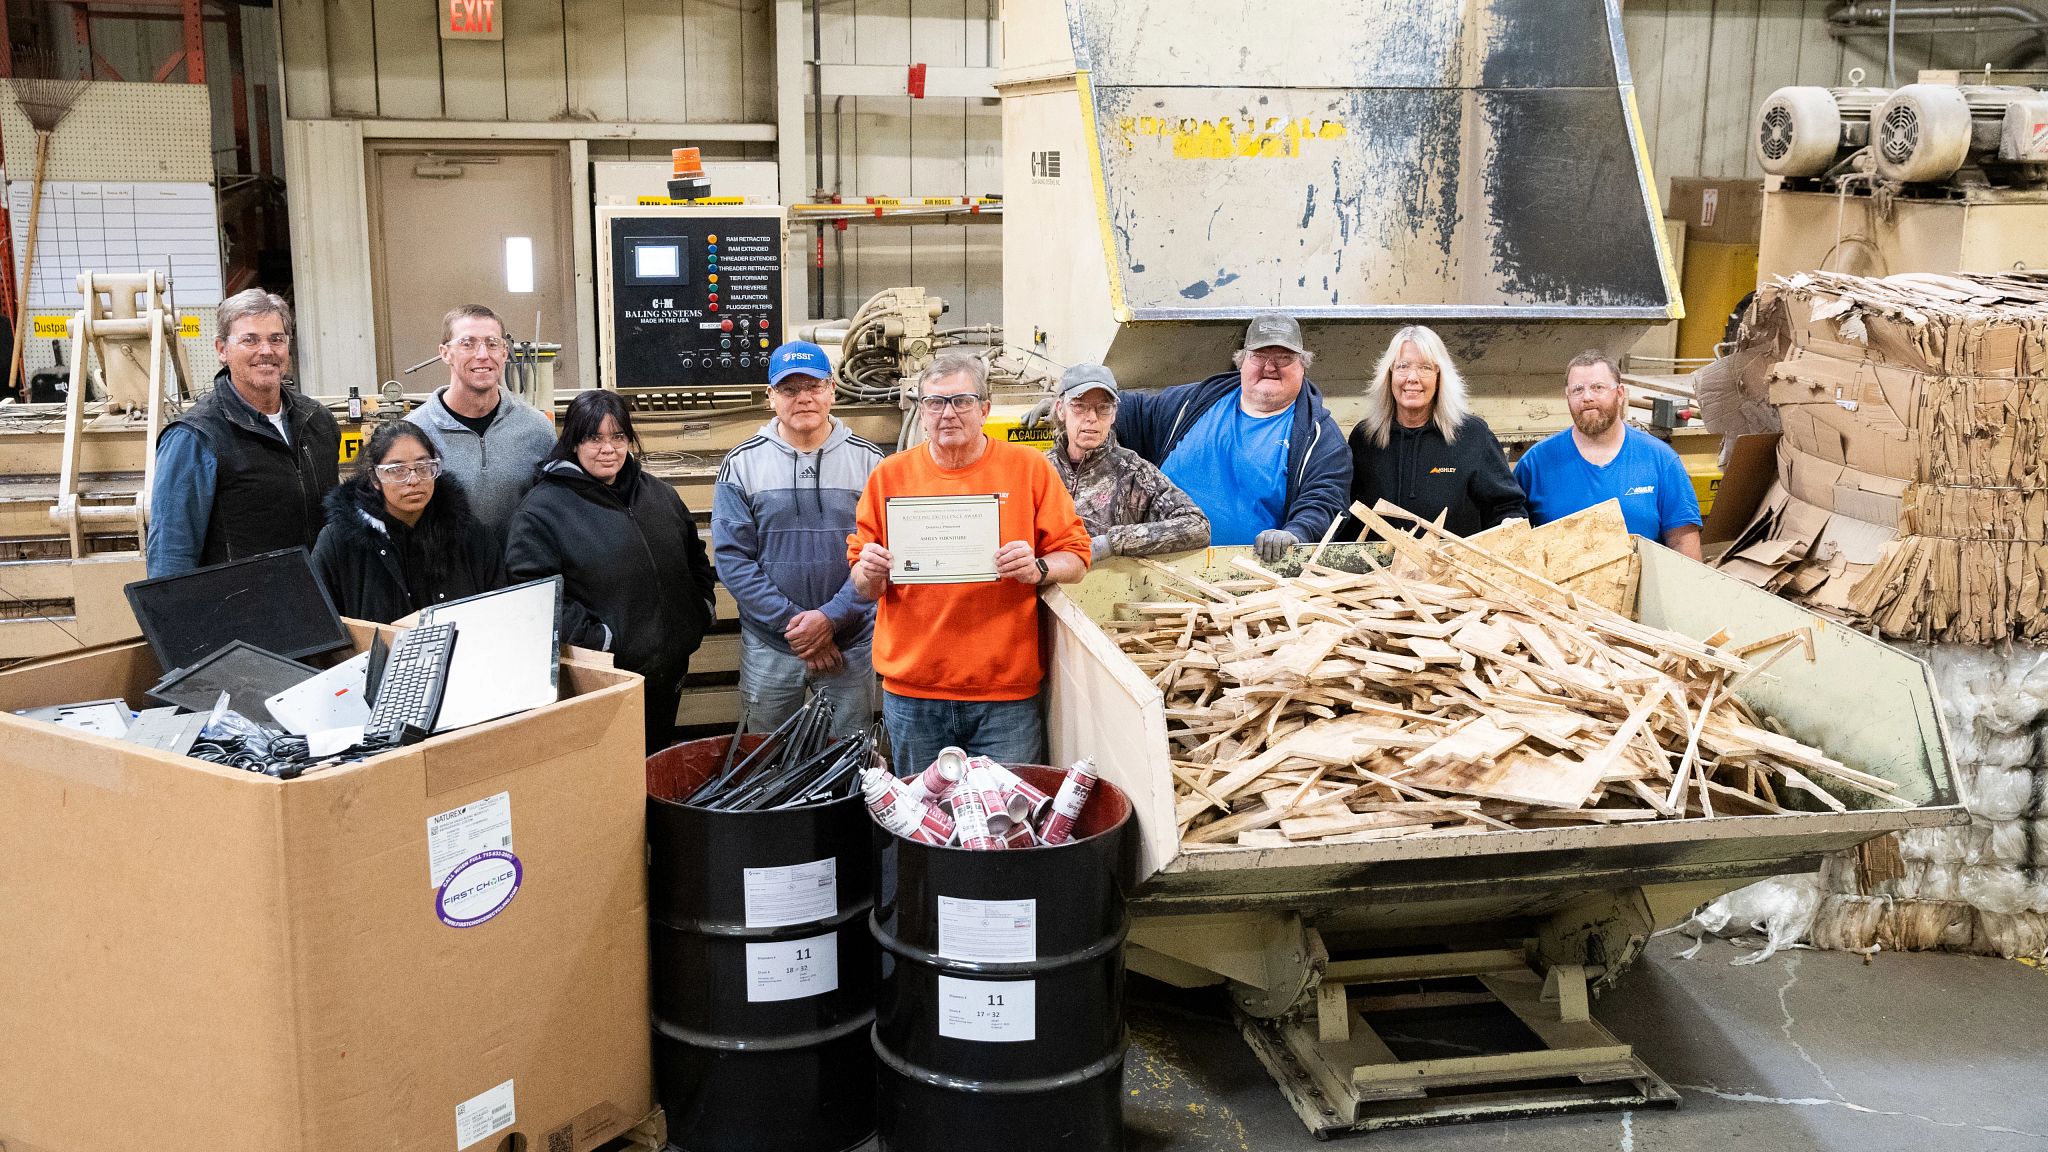 The team at Ashley Furniture gathers around a box, two 50-galloon barrels and a trailer full of recyclable scrap. The team member in the center holds the business's 2023 Wisconsin Recycling Excellence Award certificate from the DNR.